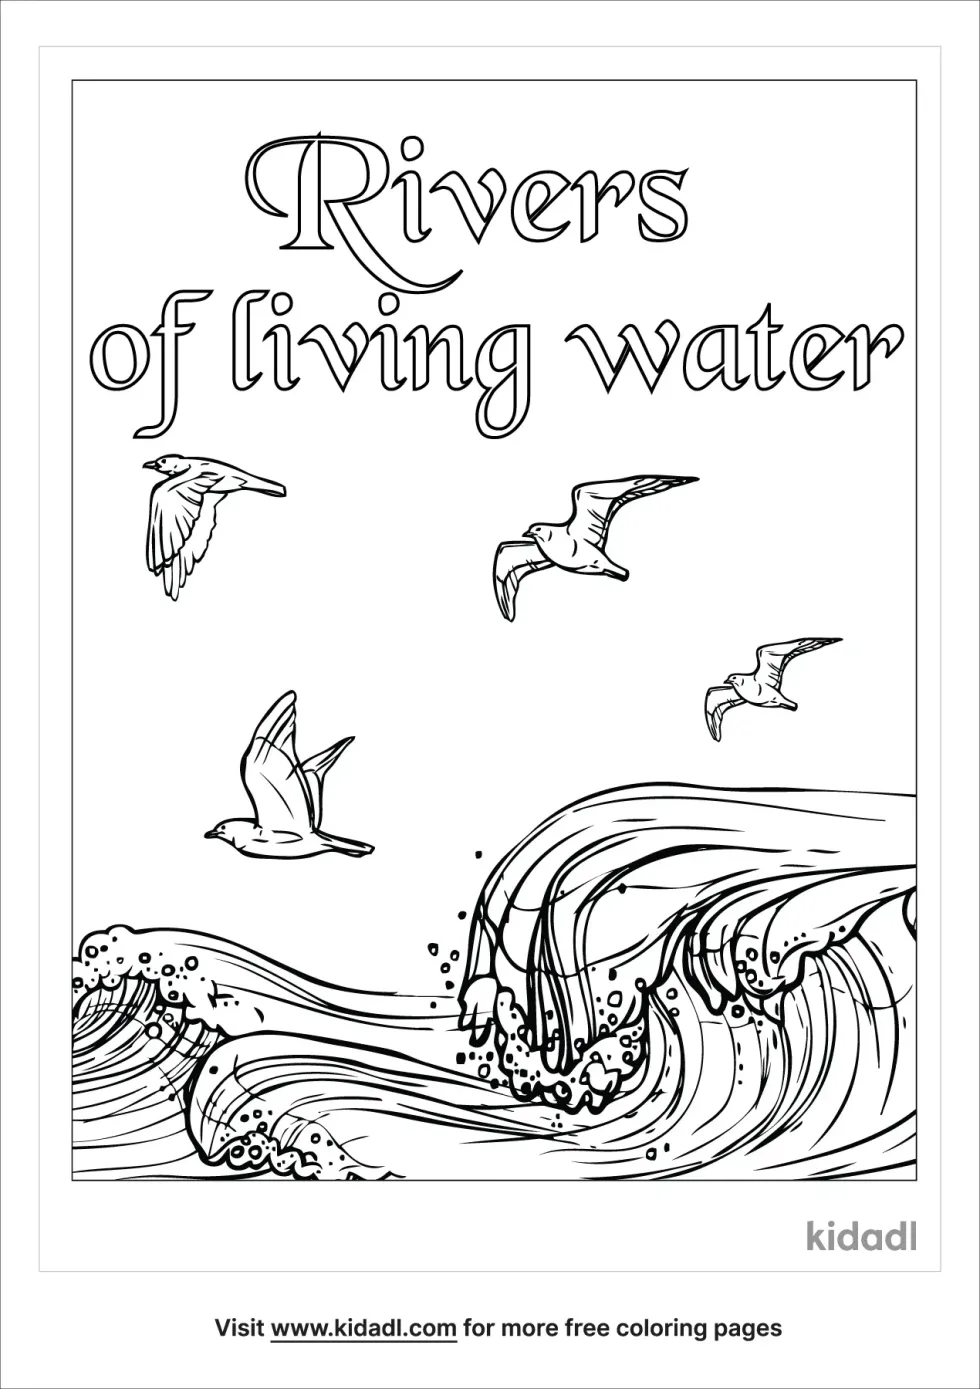 Rivers Of Living Water Coloring Page